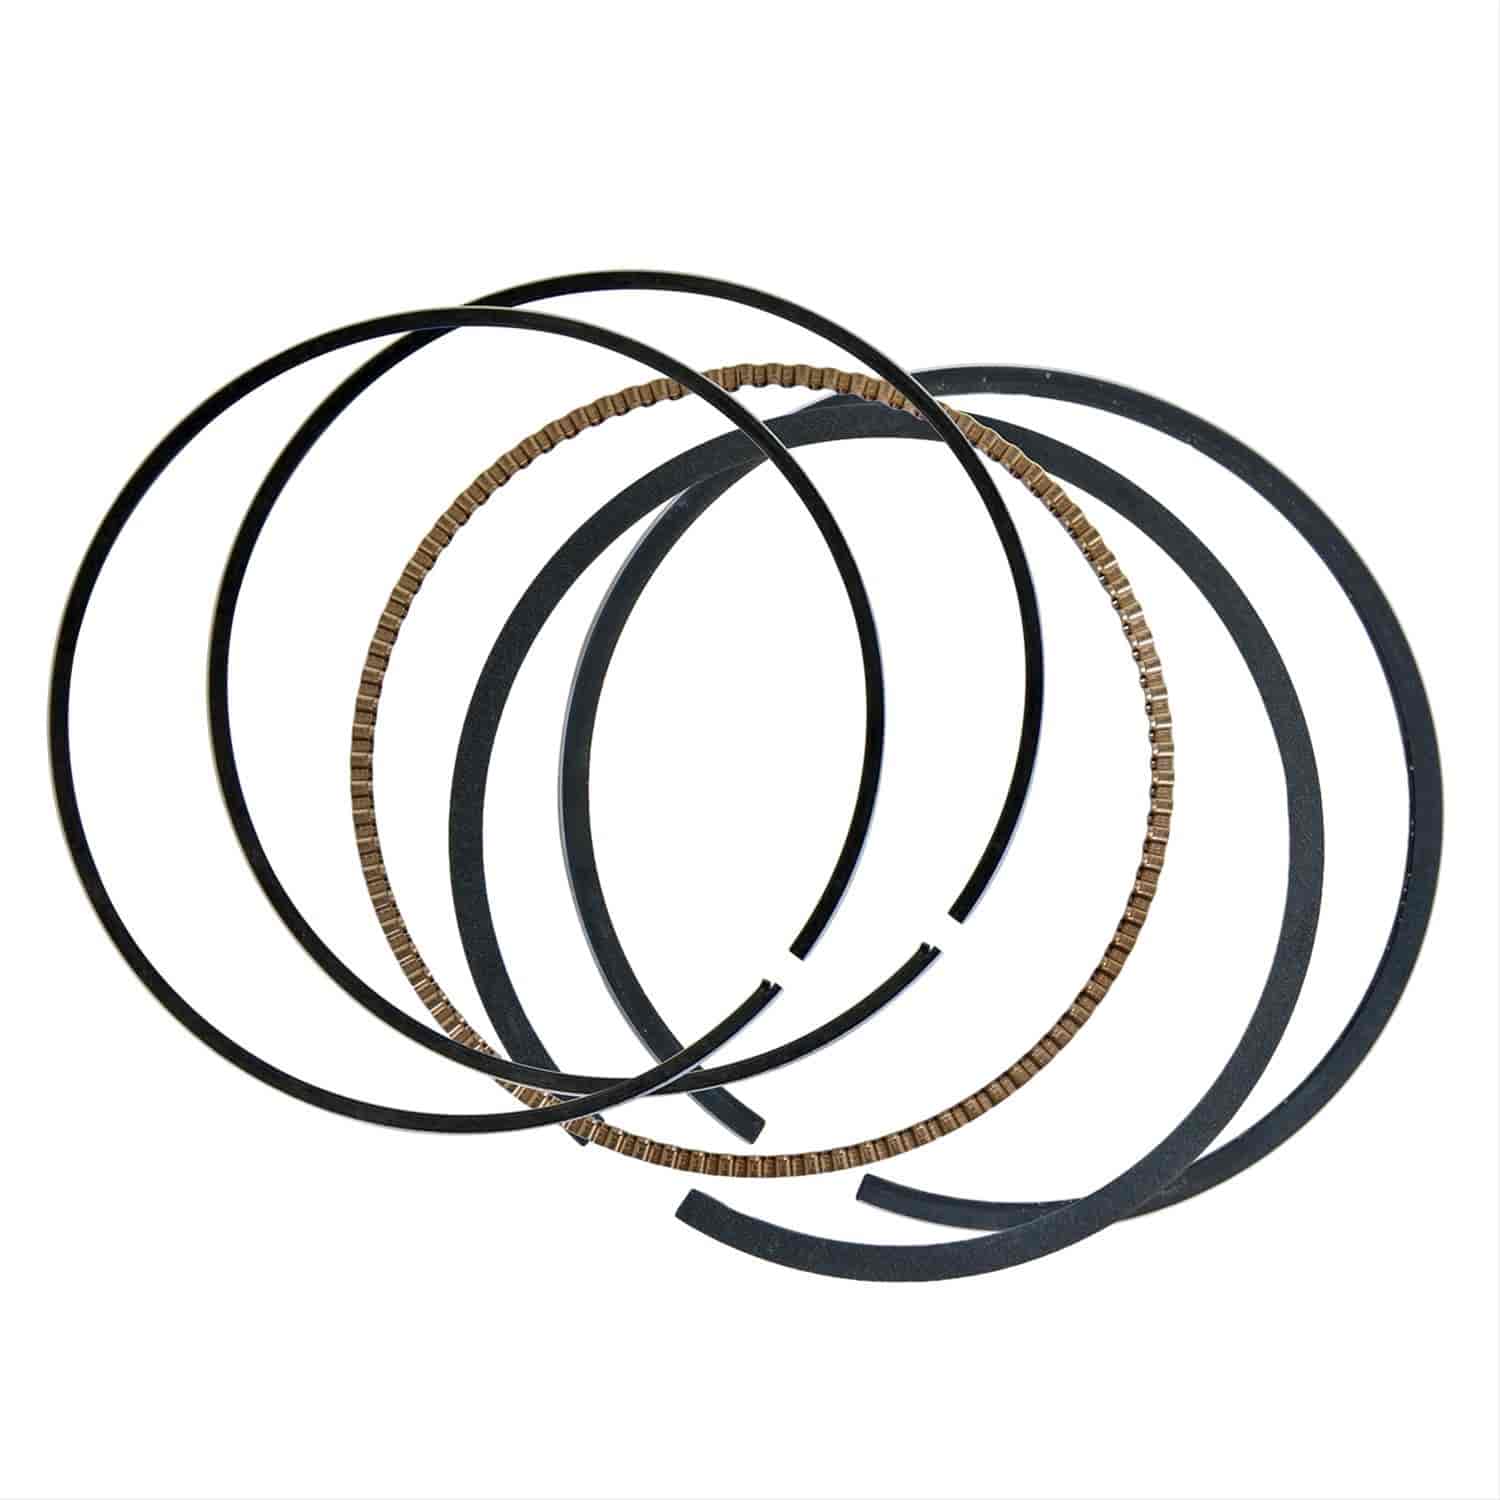 Piston Ring Set for 1 Cylinder 99.50 mm Bore, Top Ring 1.2 mm, 2nd Ring 1.5 mm, Oil Ring 2.0 mm